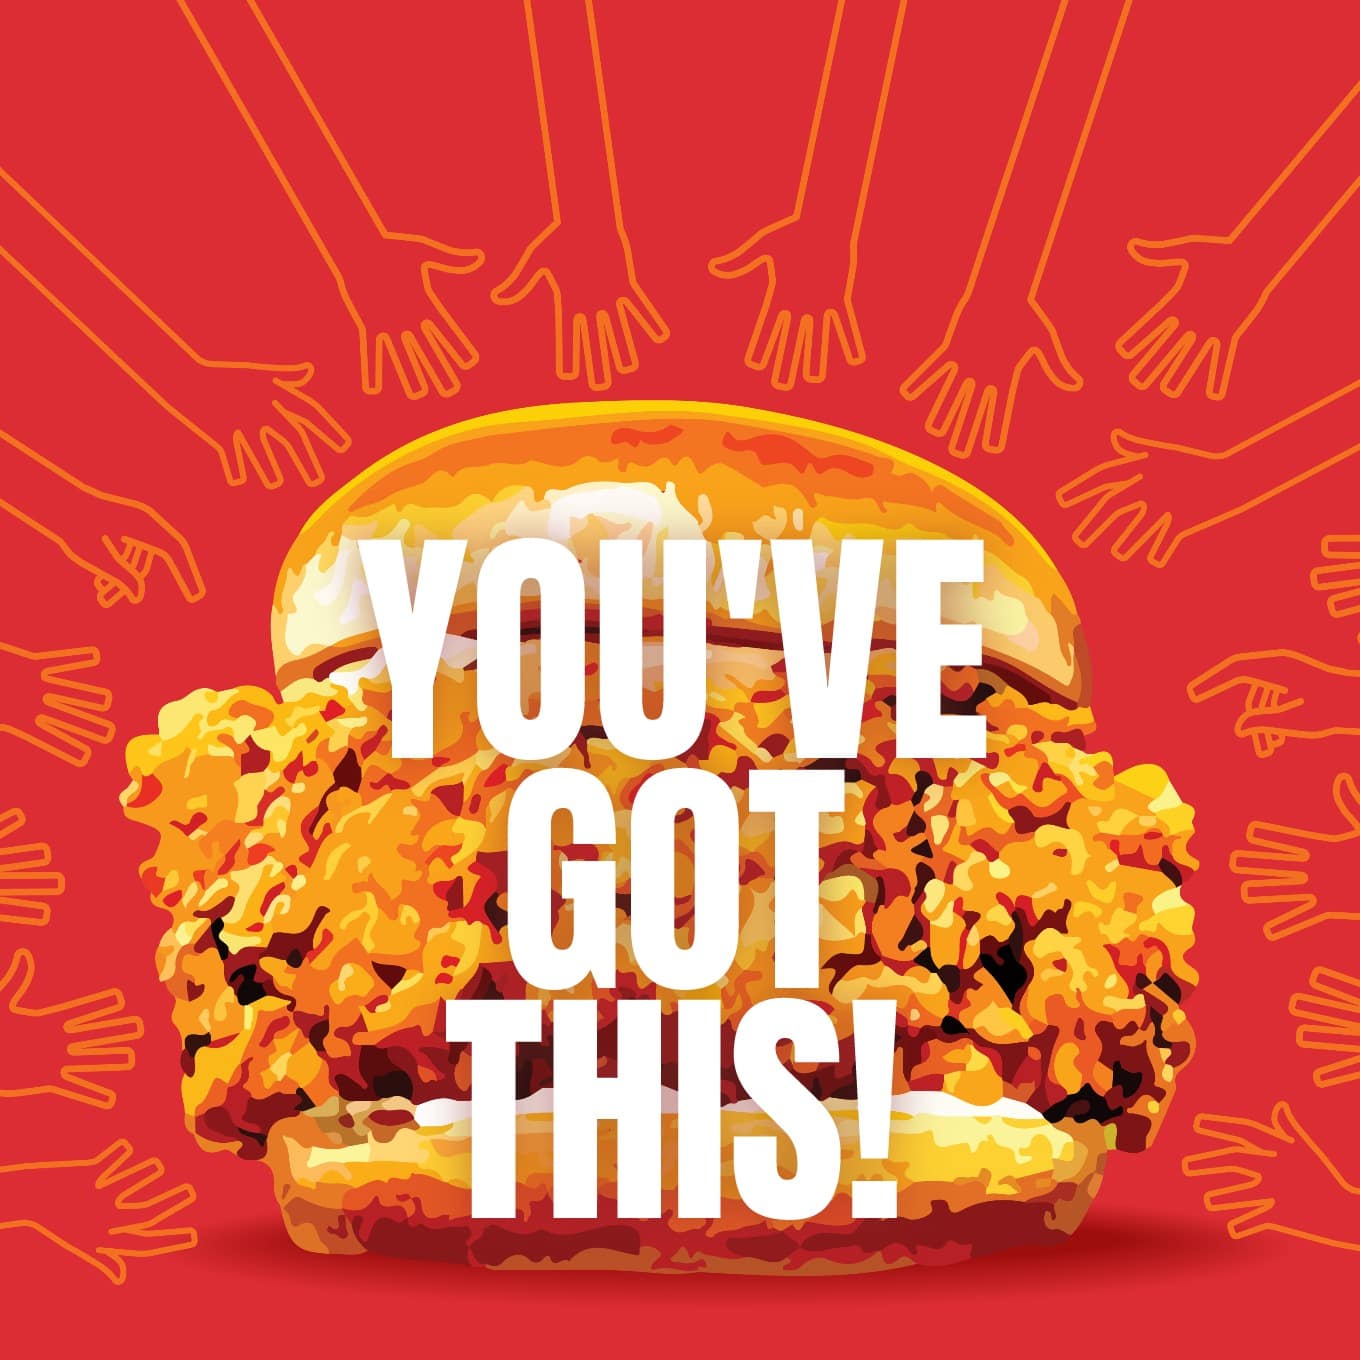 Illustrated chicken sandwich with many hands trying to grab and text, "You've Got This!"